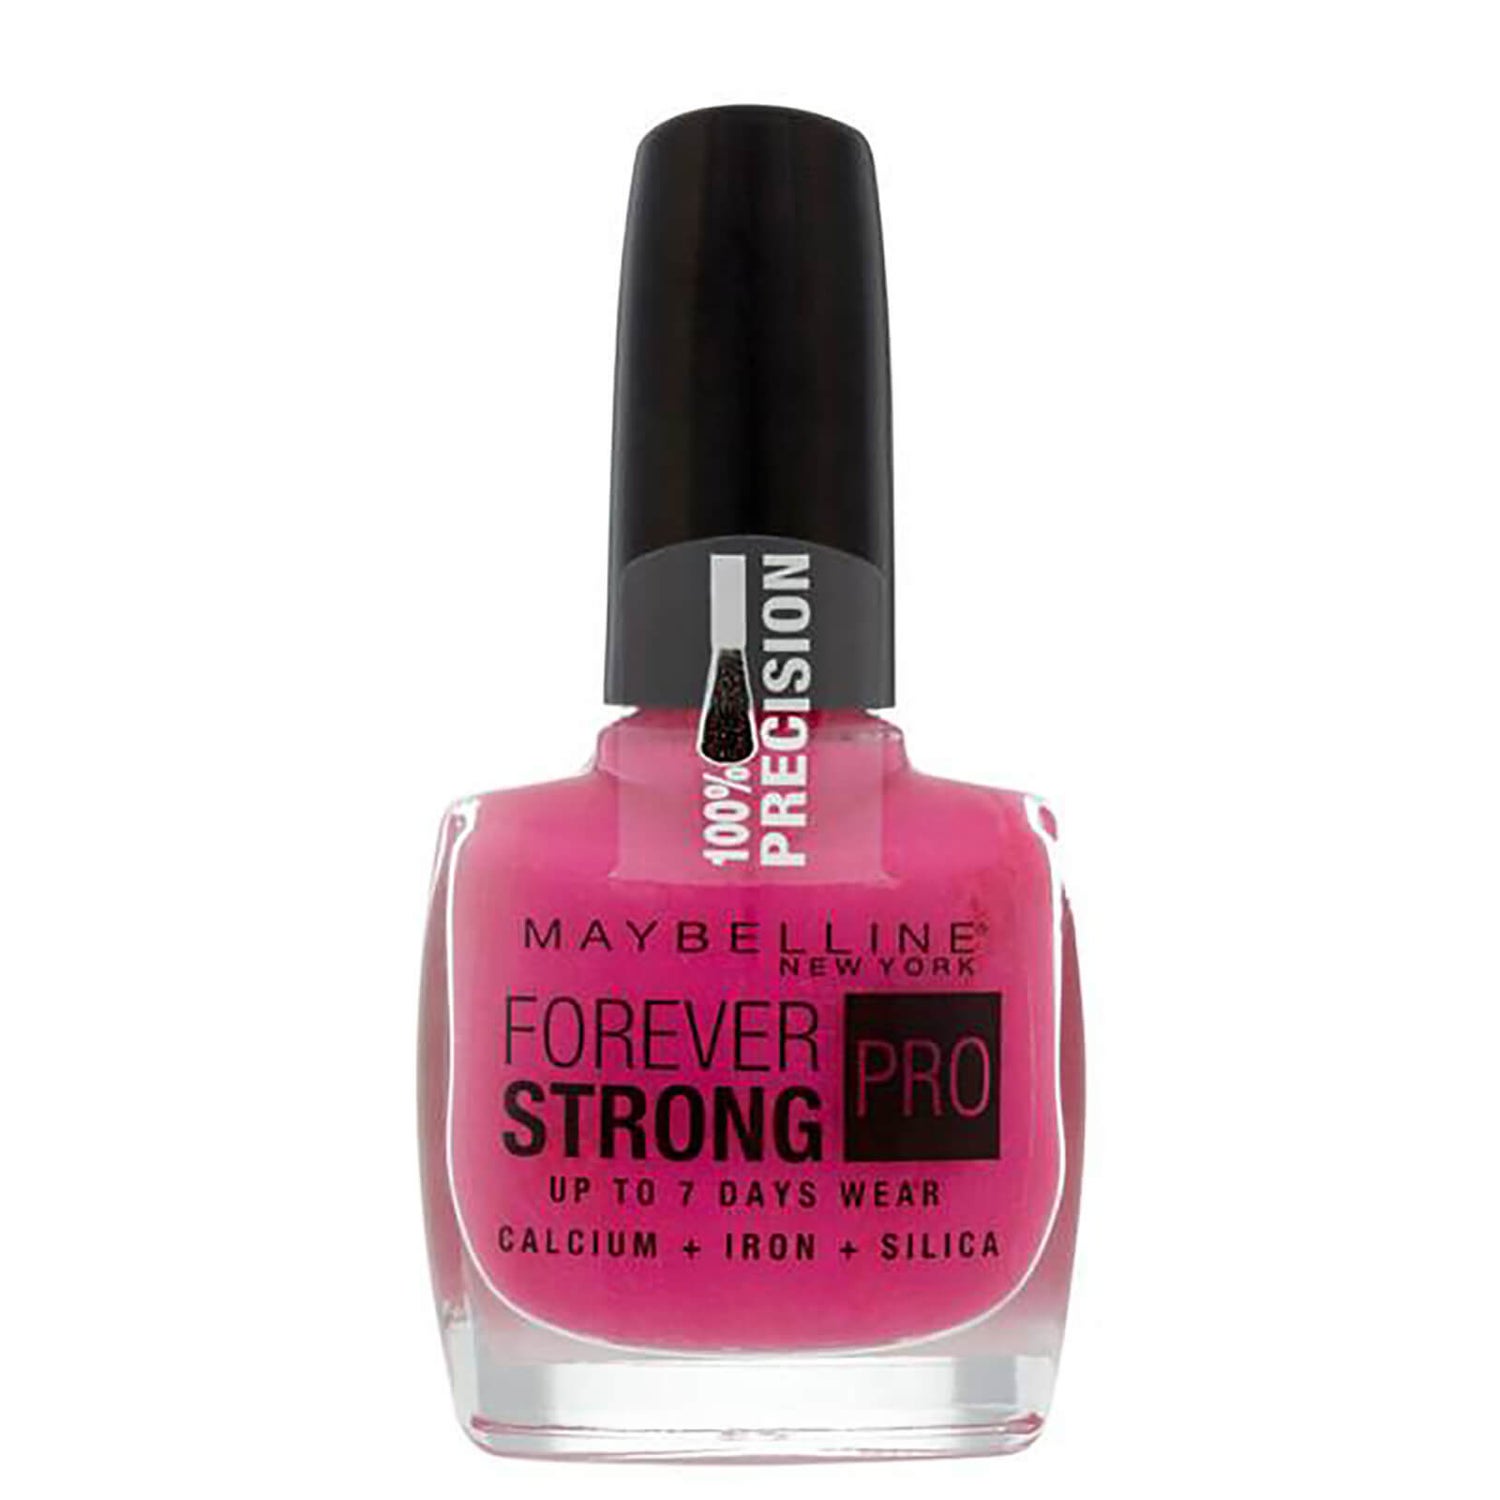 Maybelline New York Forever Strong Pro vernis à ongles  - 155 Bubble Gum (10ml)